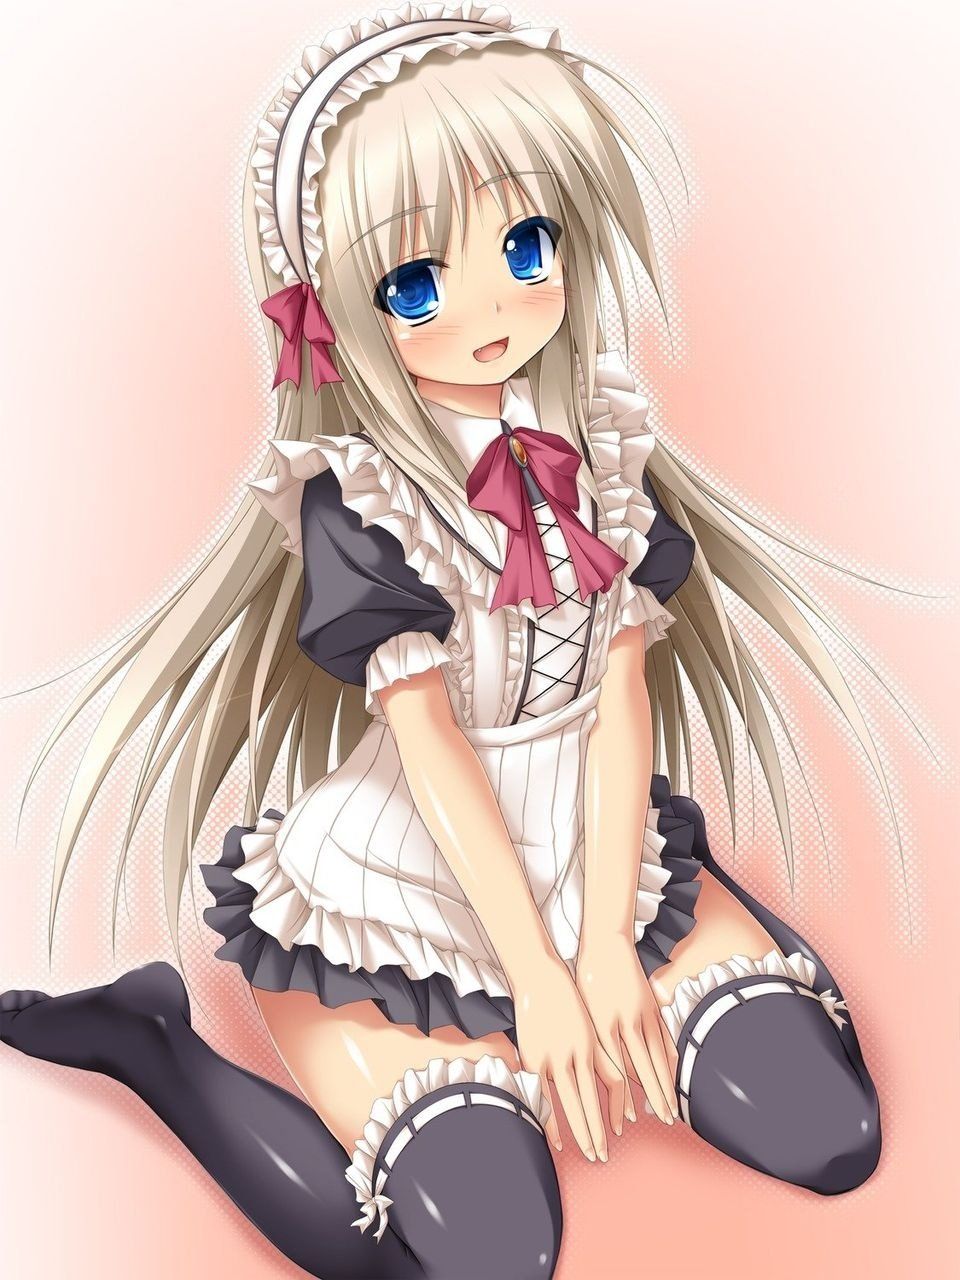 Maid hentai pictures! 1